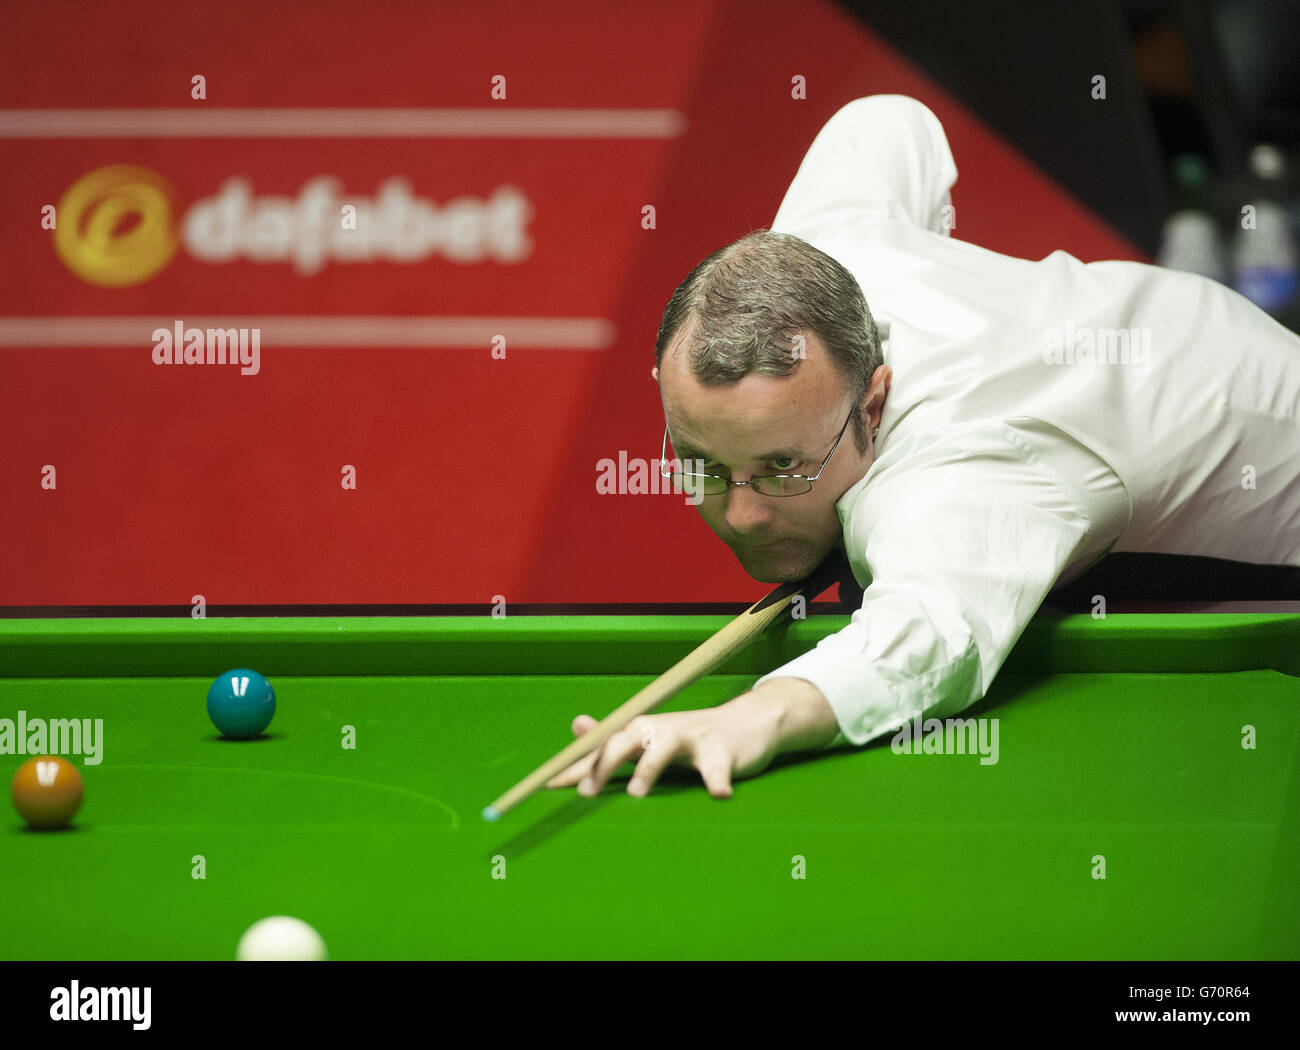 Martin Gould during his match against Marco Fu during the Dafabet World Snooker Championships at The Crucible, Sheffield. PRESS ASSOCIATION Photo. Picture date: Wednesday April 23, 2014. See PA story SNOOKER World. Photo credit should read: Tim Goode/PA Wire Stock Photo